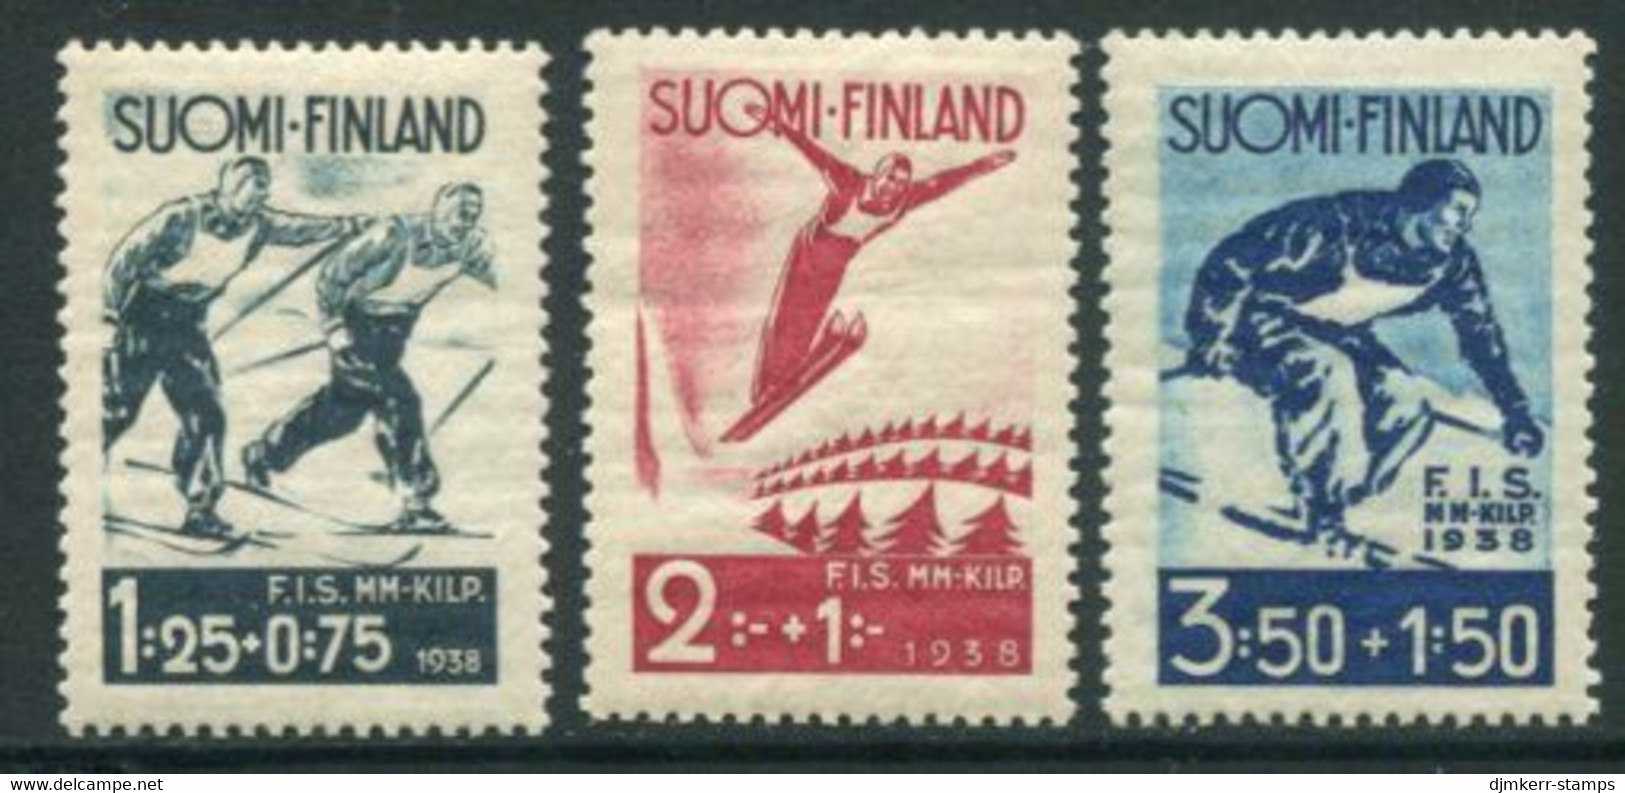 FINLAND 1938 Skiing World Championships MNH / **.  Michel 208-10 - Unused Stamps